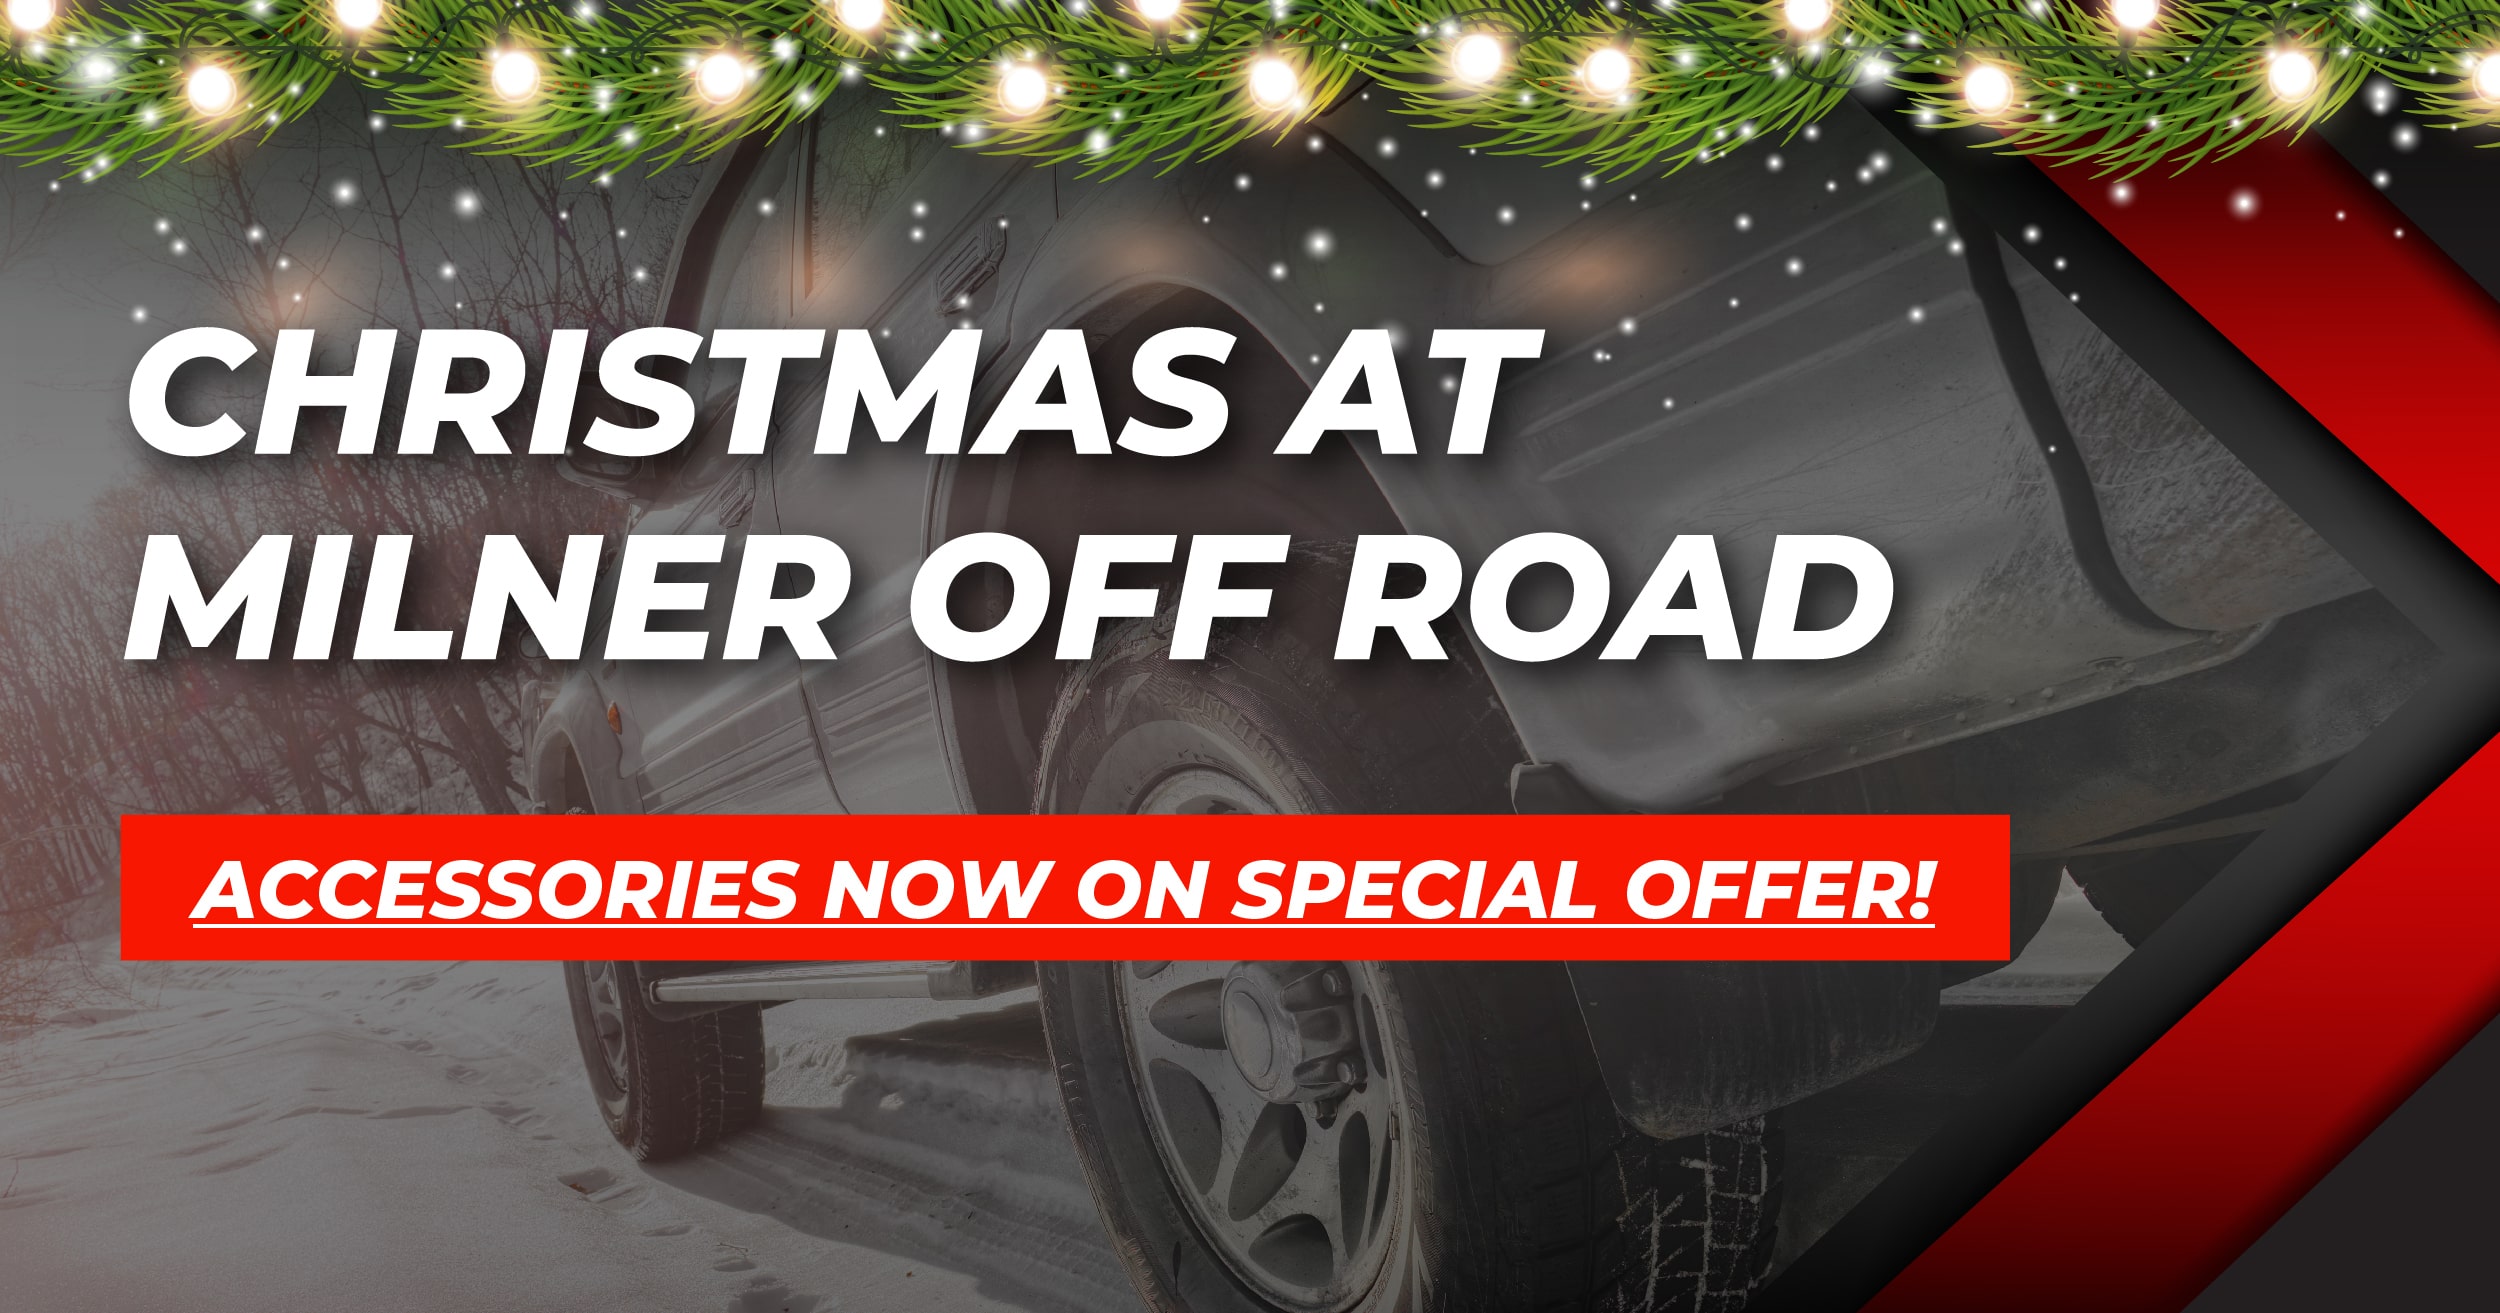 Christmas Comes Early at Milner Off Road!